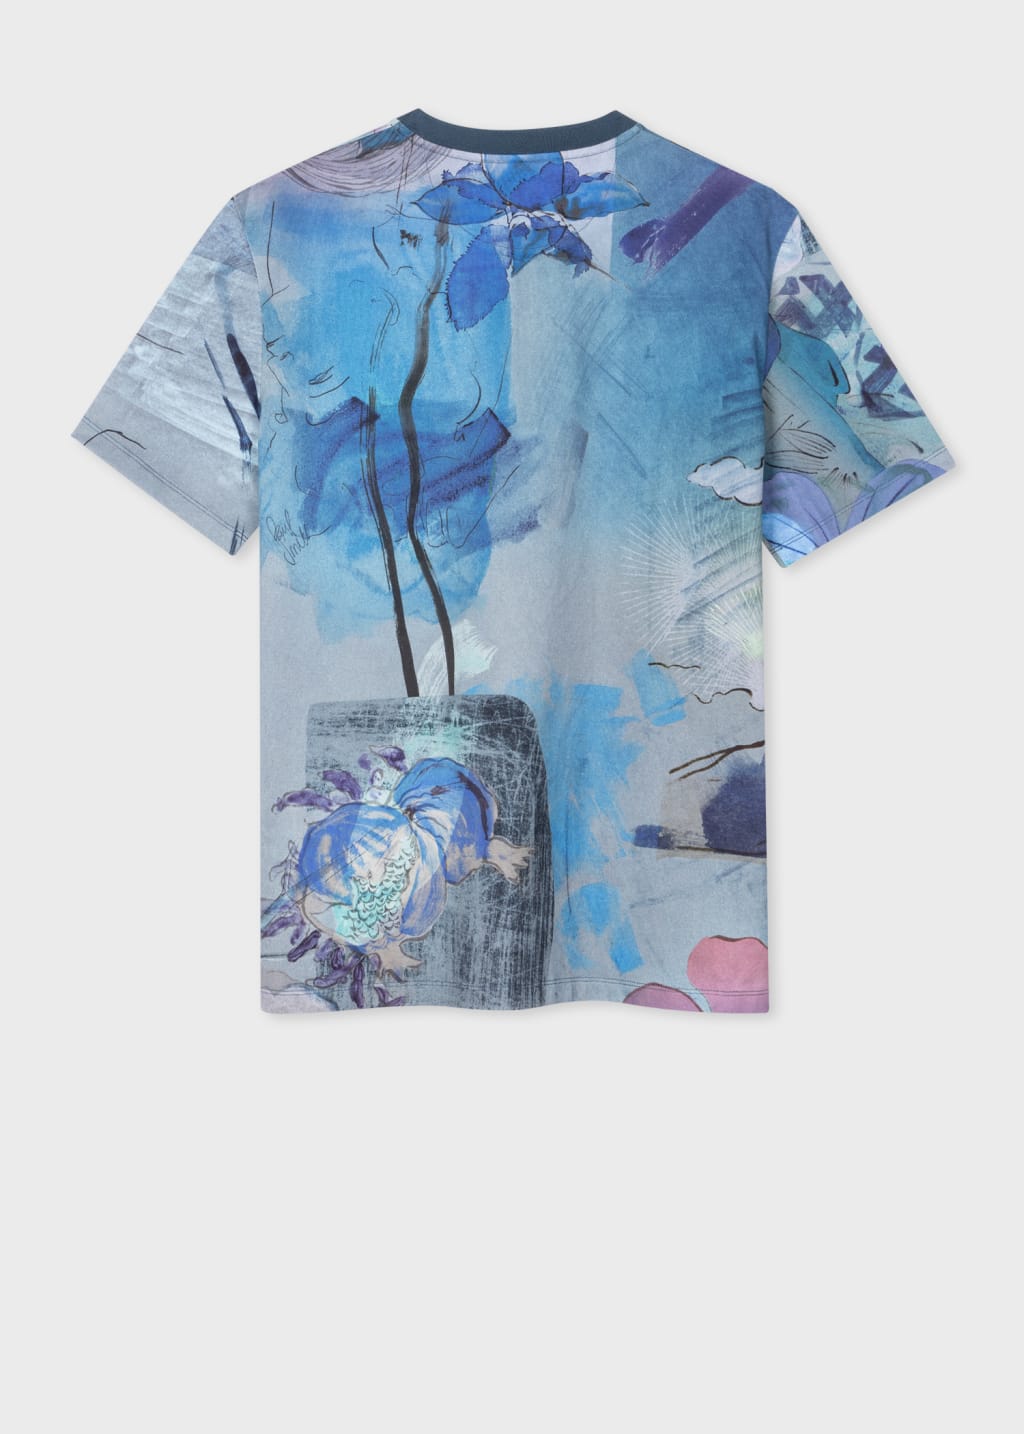 Rear View - Blue 'Narcissus' Print Cotton T-Shirt Paul Smith